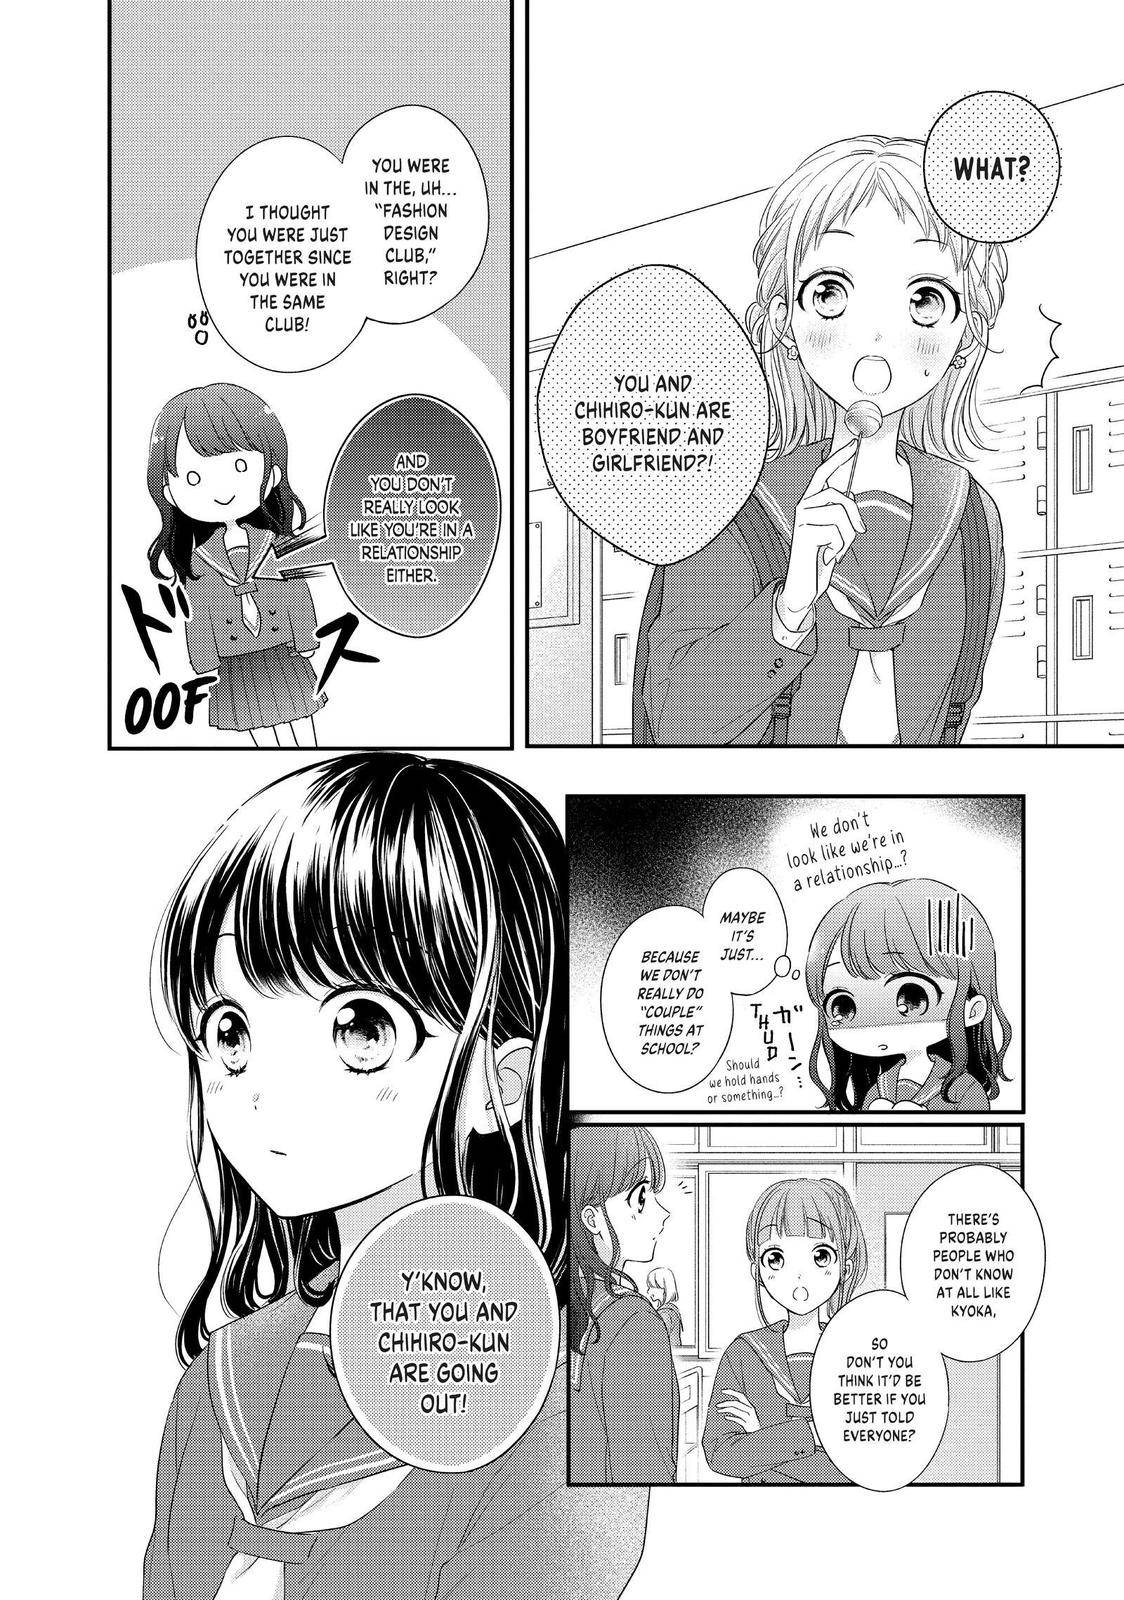 Chihiro-kun Only Has Eyes for Me - chapter 26 - #4